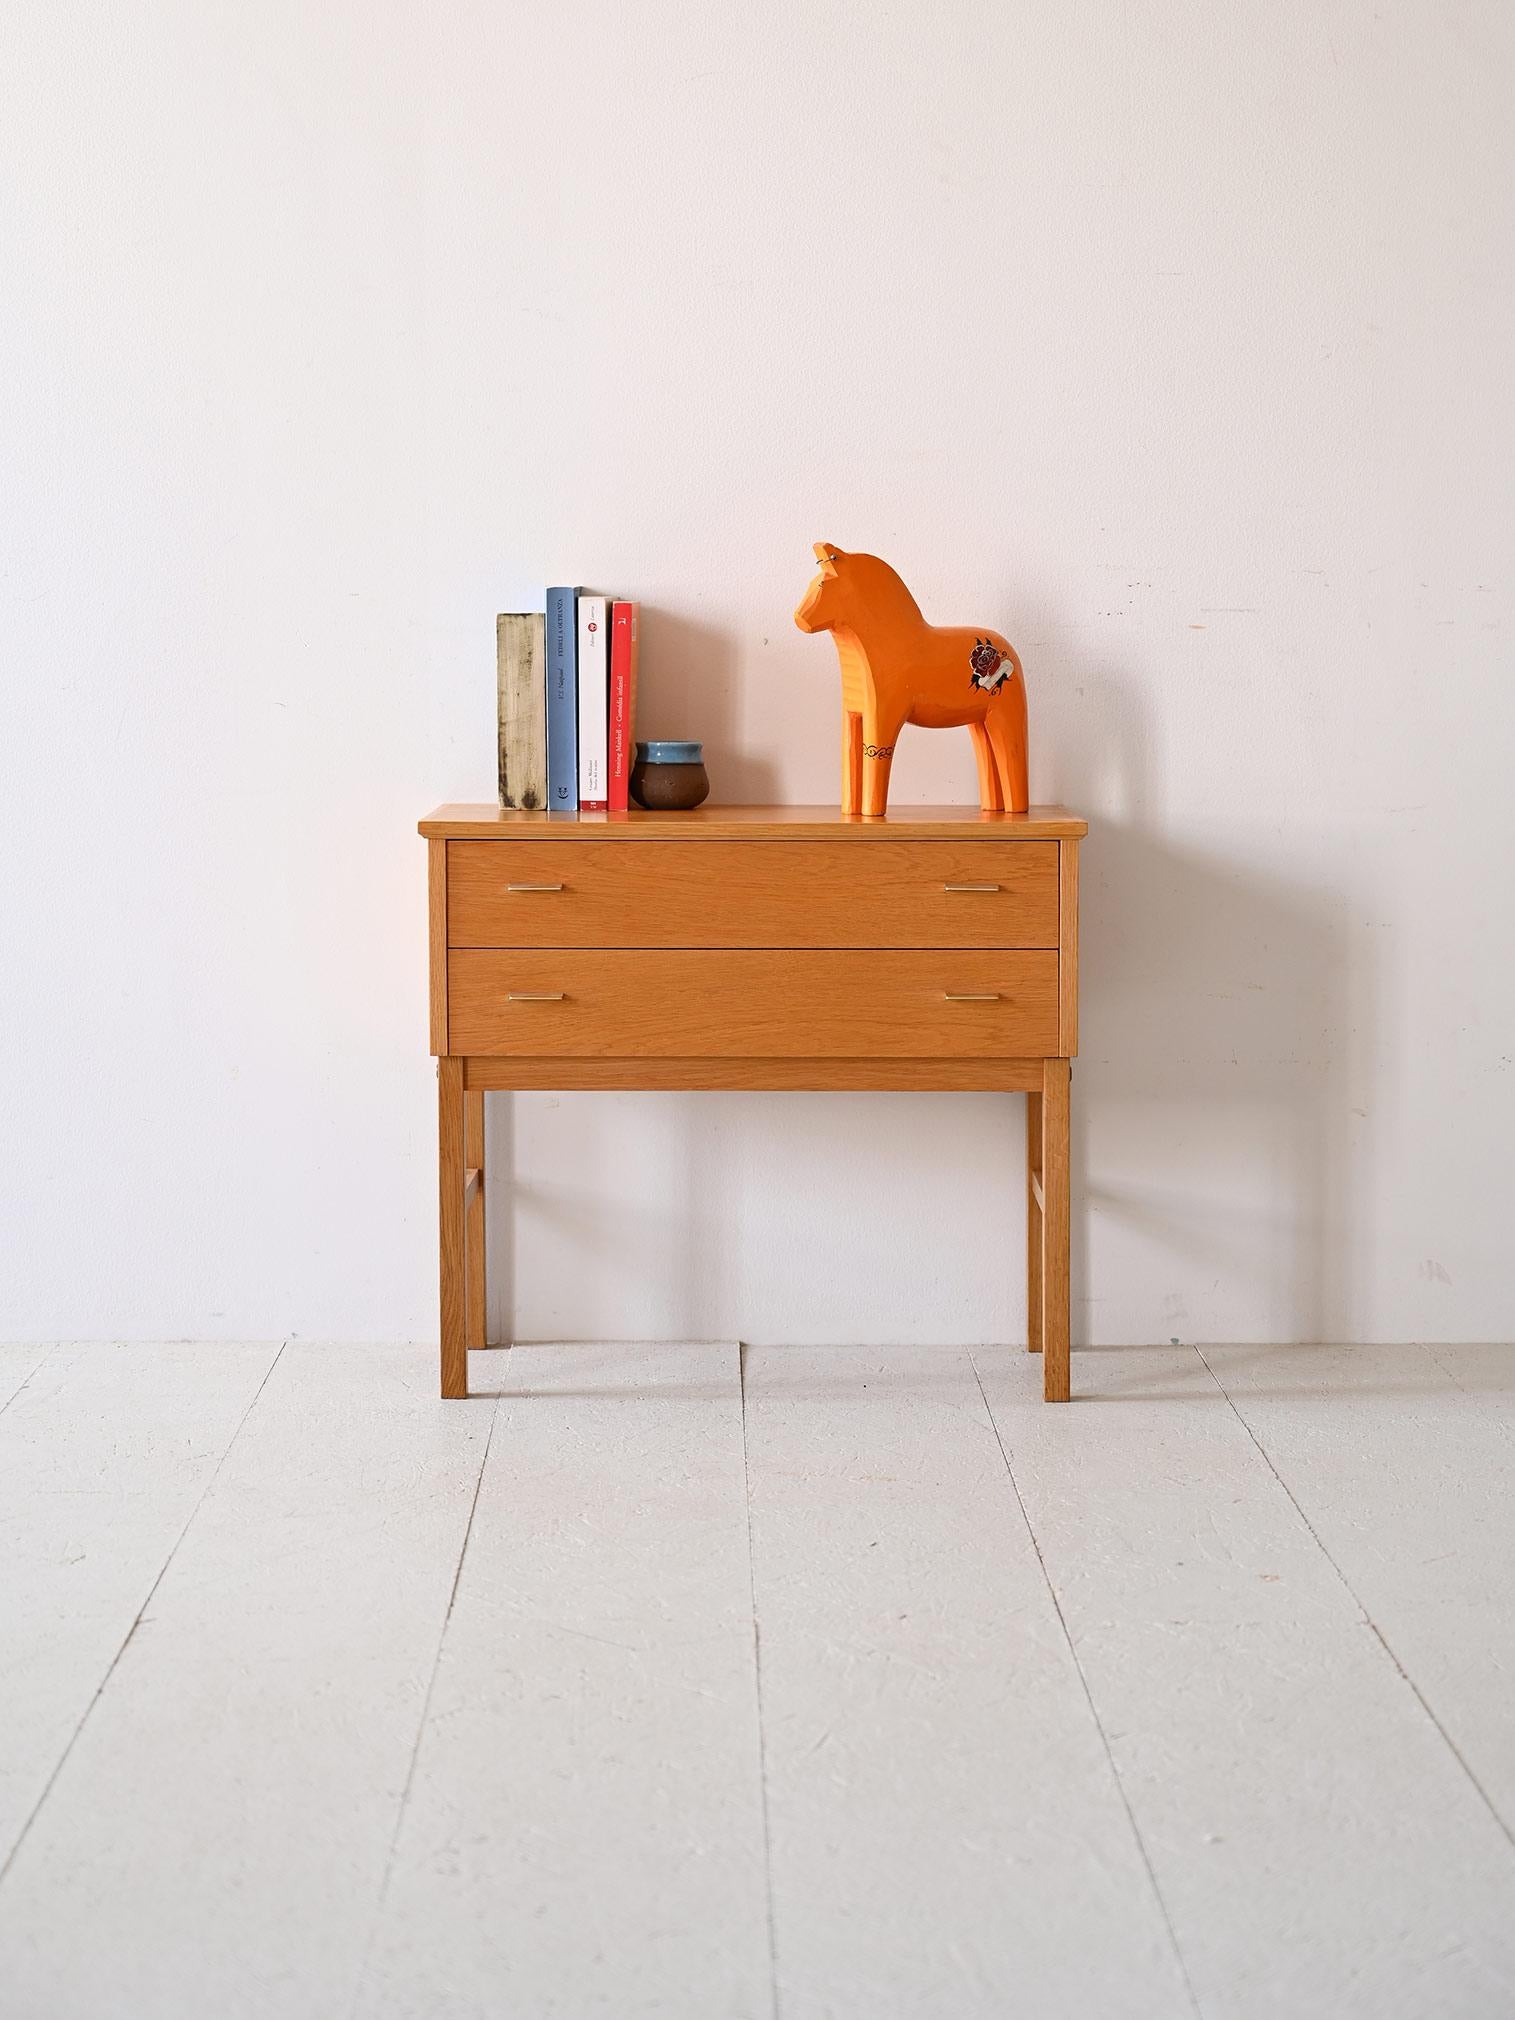 Scandinavian-made bedside table/drawer chest with drawers produced in 1969.
This particular design piece stands out for its original shape and warm oak color.

The two drawers feature a metal handle, and the long legs give lightness to the